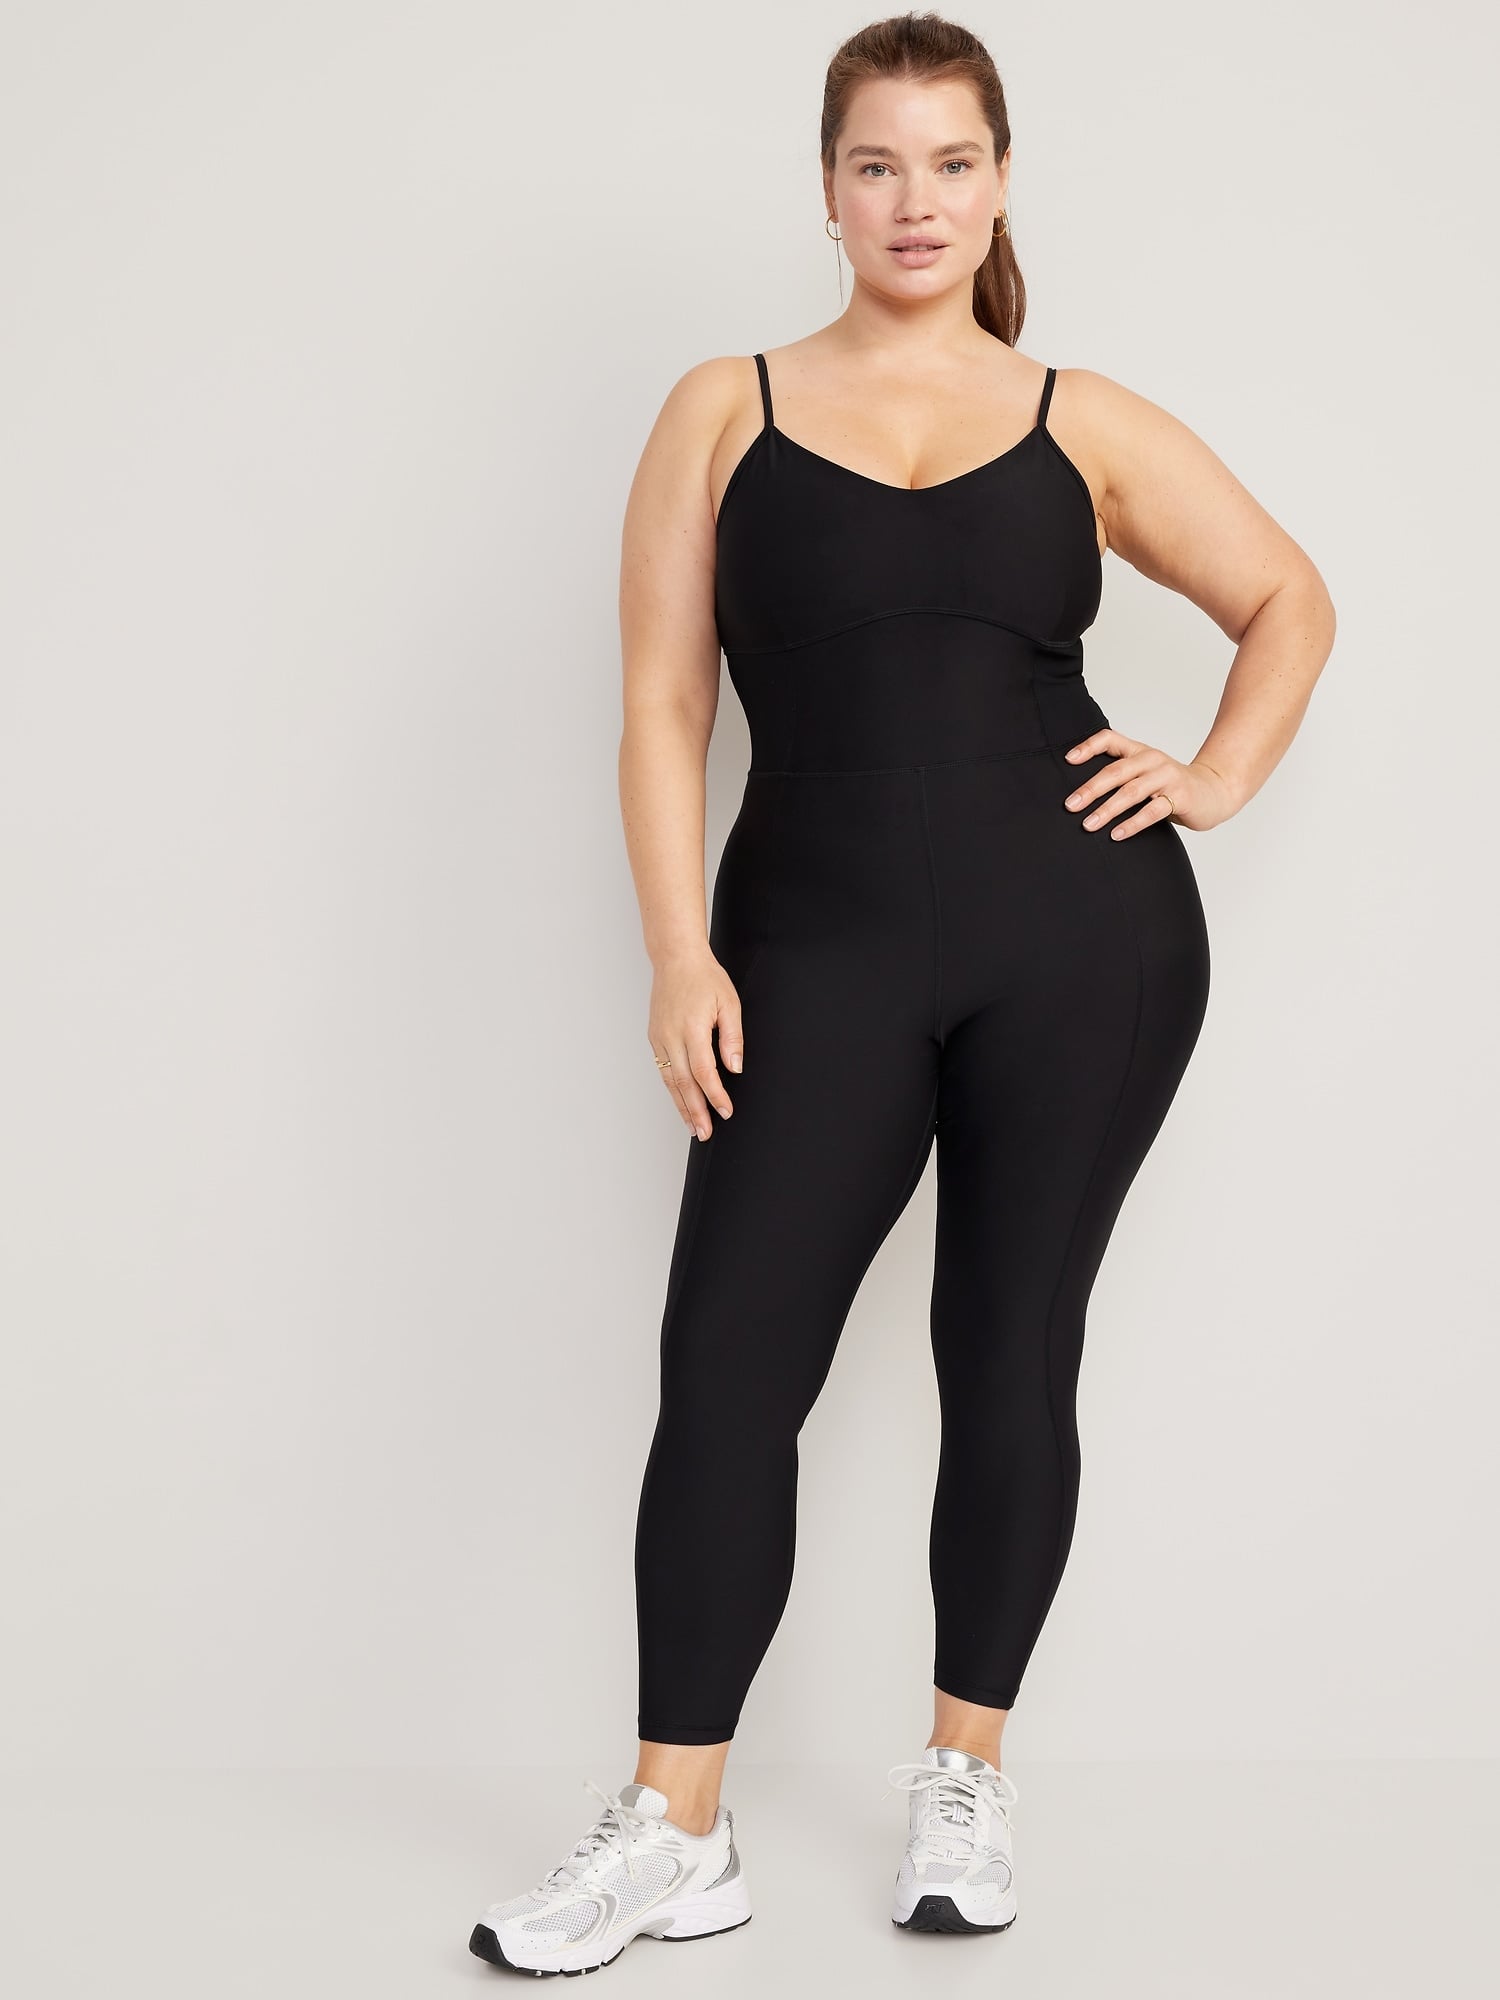 The Best Plus-Size Clothes From Old Navy